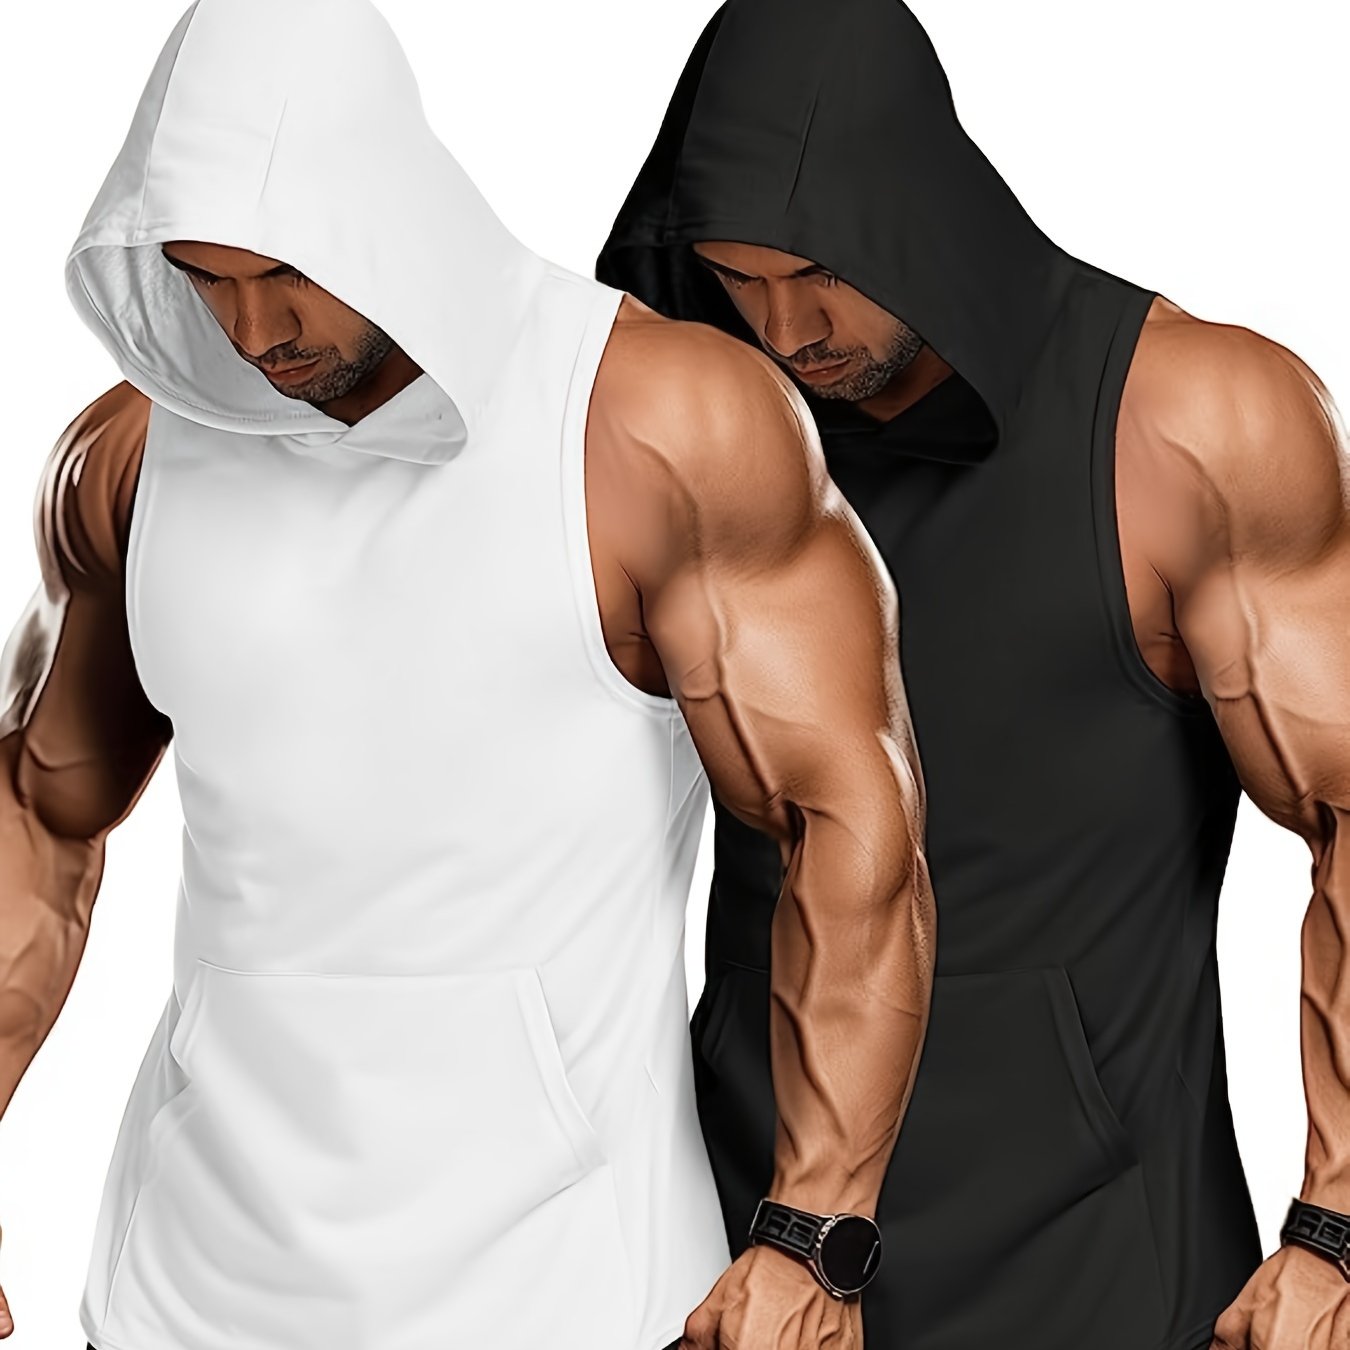 Men's Training Hooded Tank Top Set, Casual Comfy Vest Shirts For Summer, Men's Clothing Top For Gym Fitness